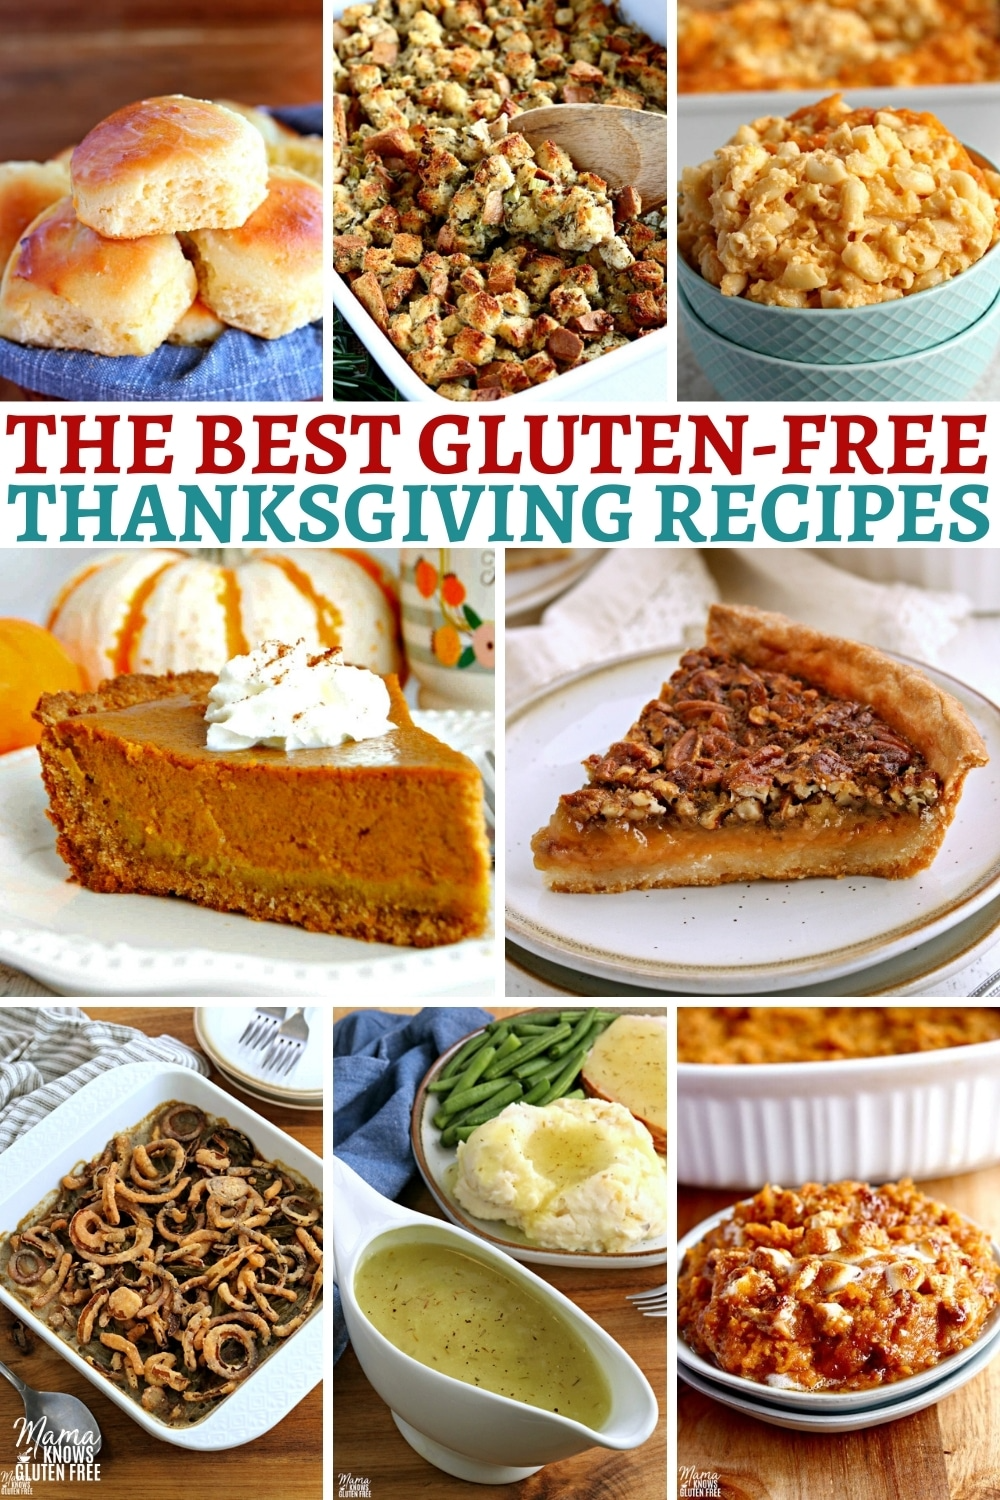 The Best Gluten-Free Thanksgiving Recipes {Dairy-Free Options}